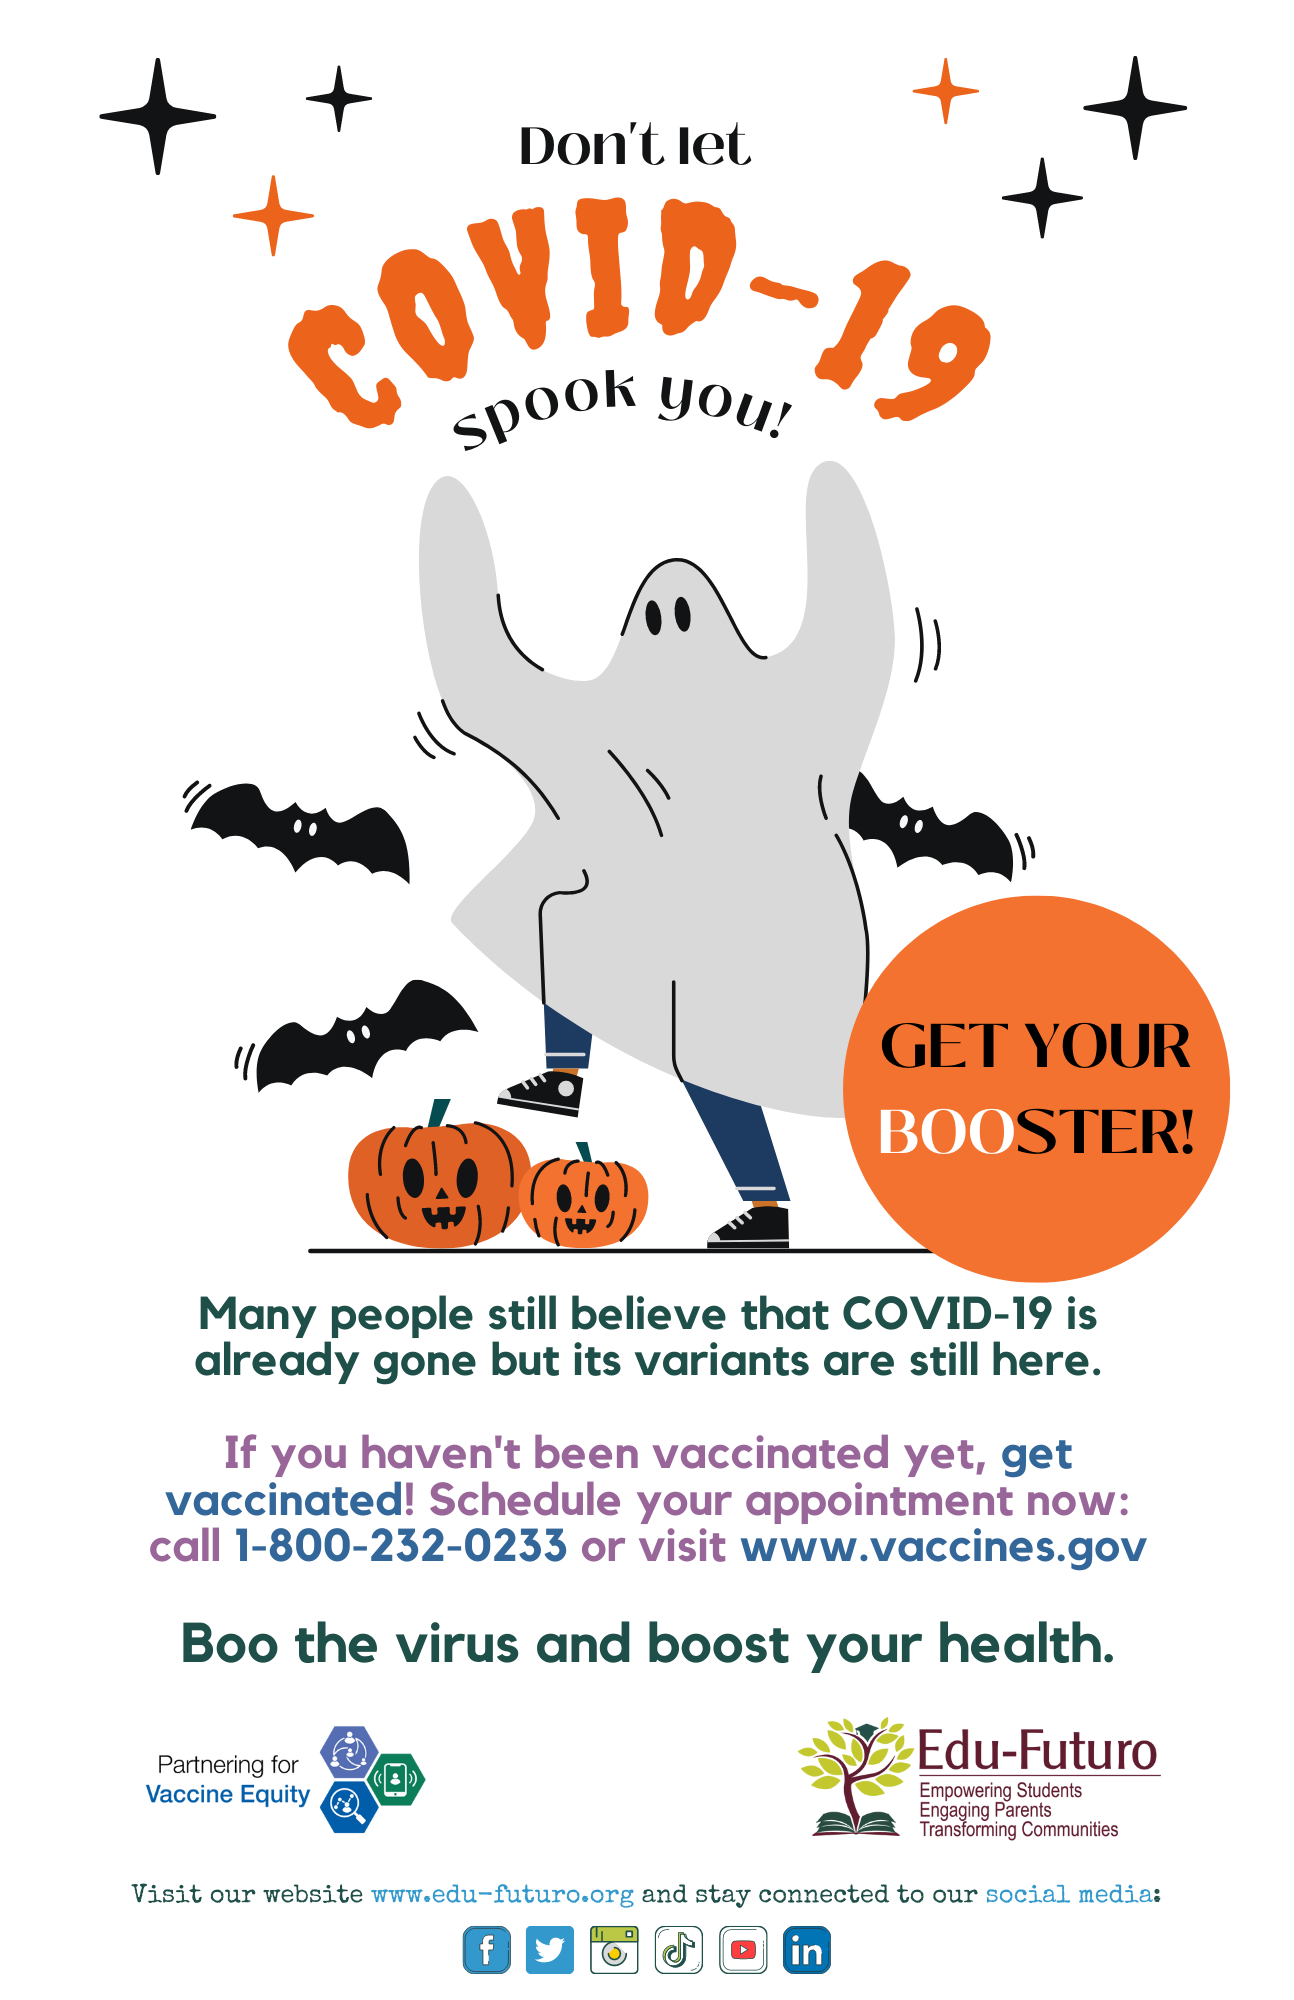 Graphic with white background; orange, black, blue, and purple text; and a Halloween theme with bats, pumpkins, and a person in a ghost costume Partnering for Vaccine Equity and Edu-Futuro logos are at the bottom of the image along with weblinks and ways to connect via social media.